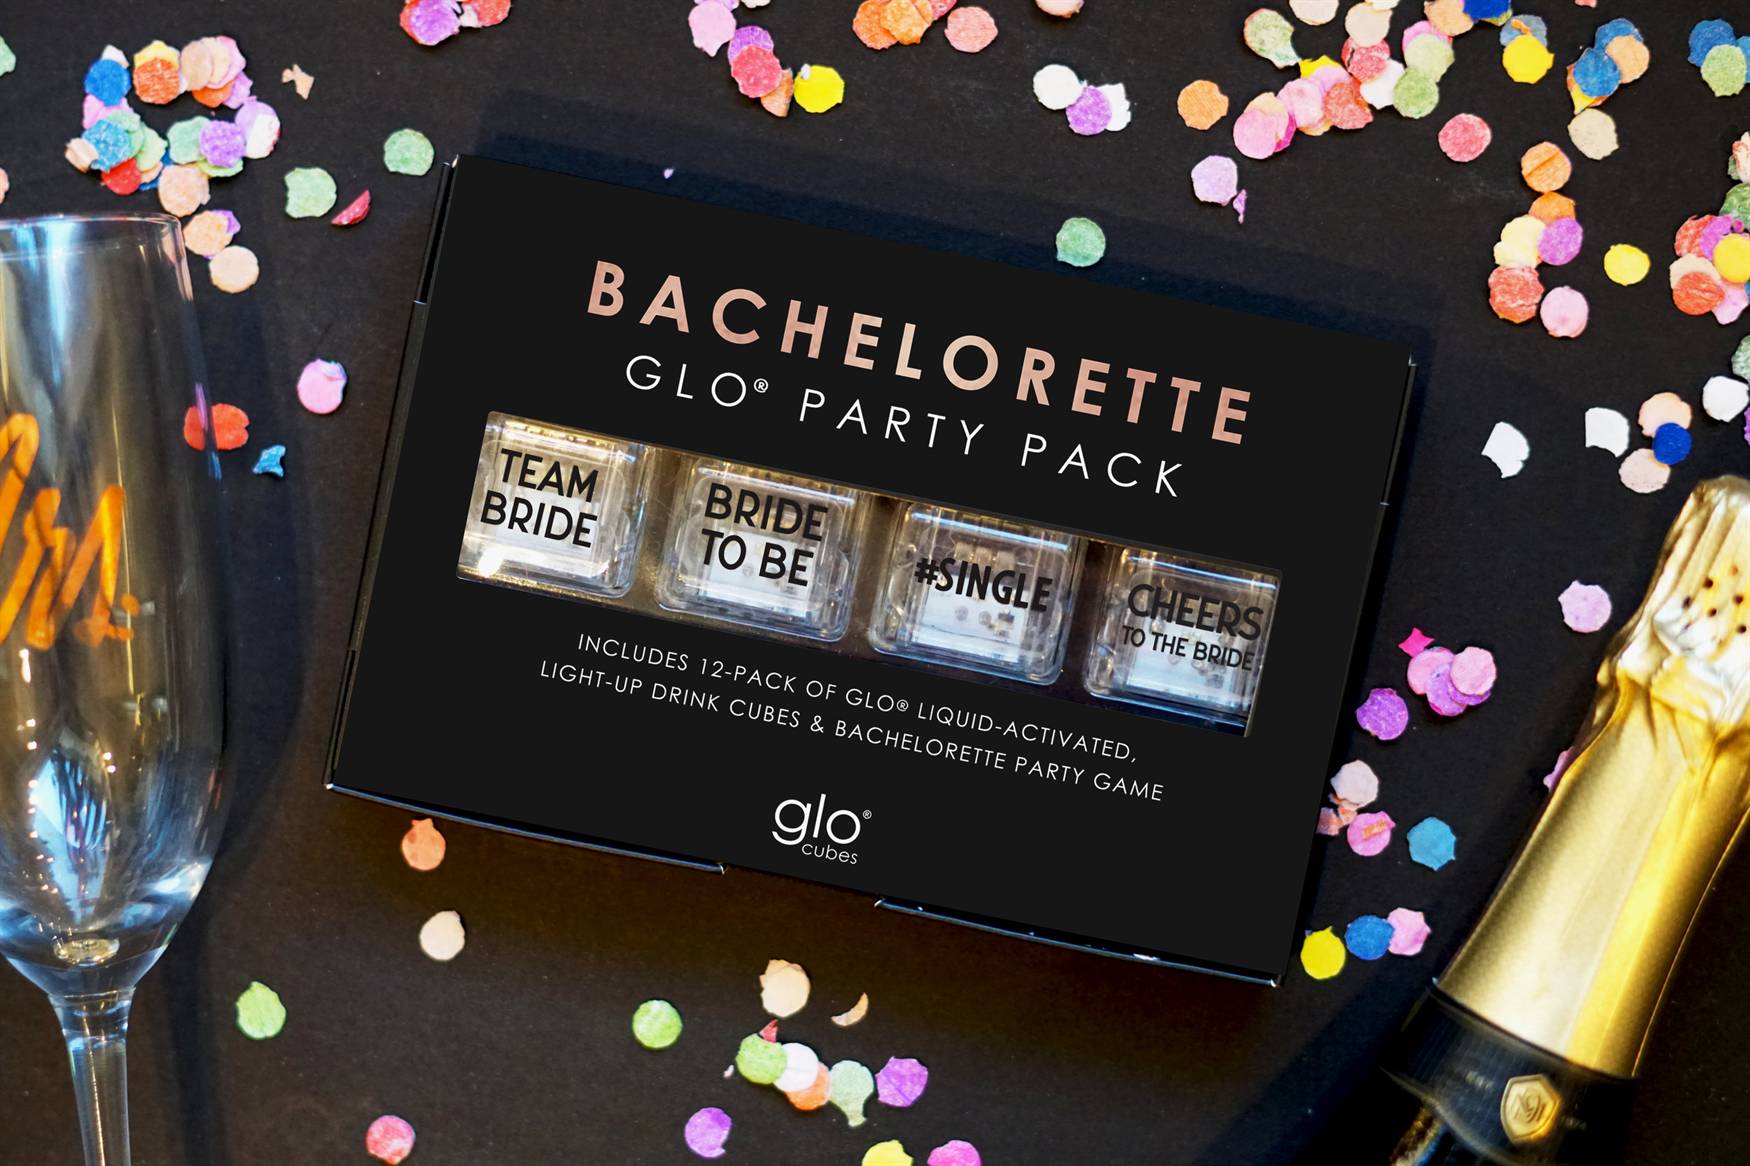 Bachelorette Party Glo Pack